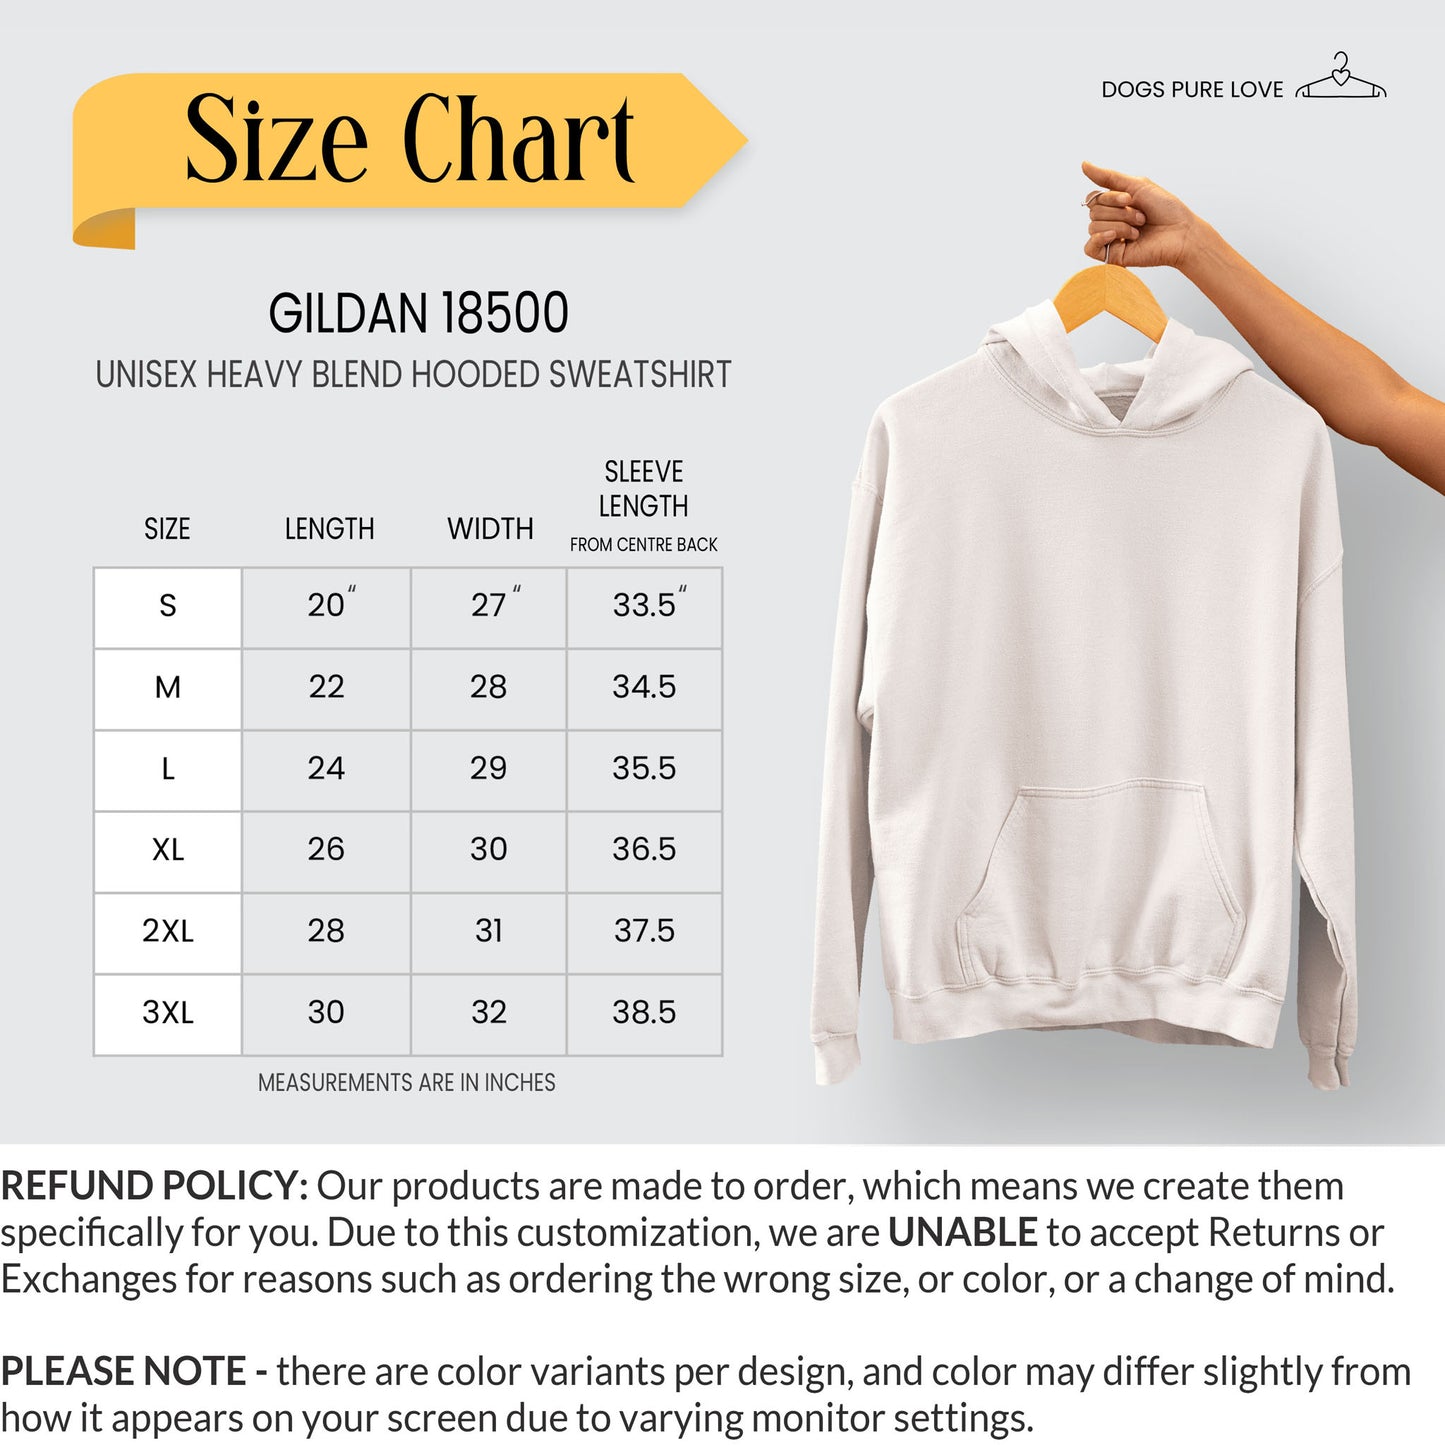 A hoodie size chart showcases the measurements provided by Dogs Pure Love.